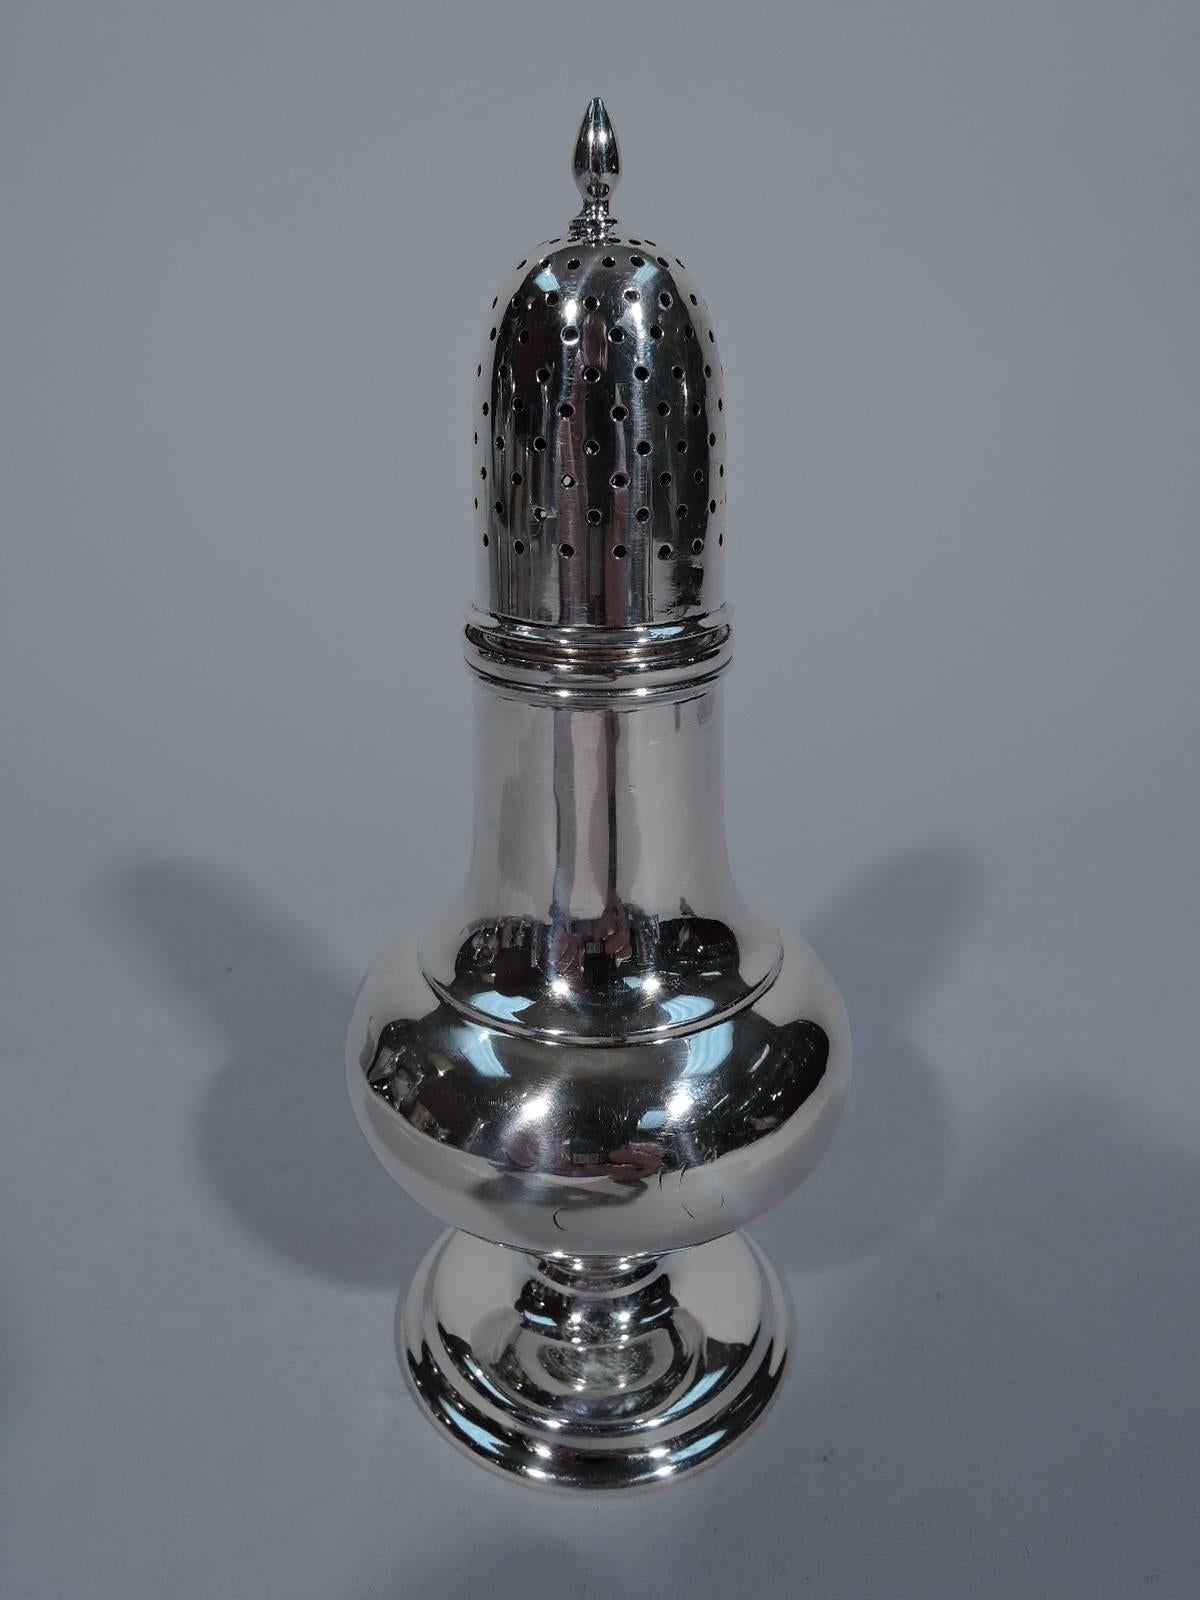 Pair of sterling silver salt and pepper shakers. Made by Tiffany & Co. in New York, circa 1910. Each: bellied baluster on short concave stem mounted to stepped support. Cover pierced and threaded with finial. Hallmark includes no. 2539 and